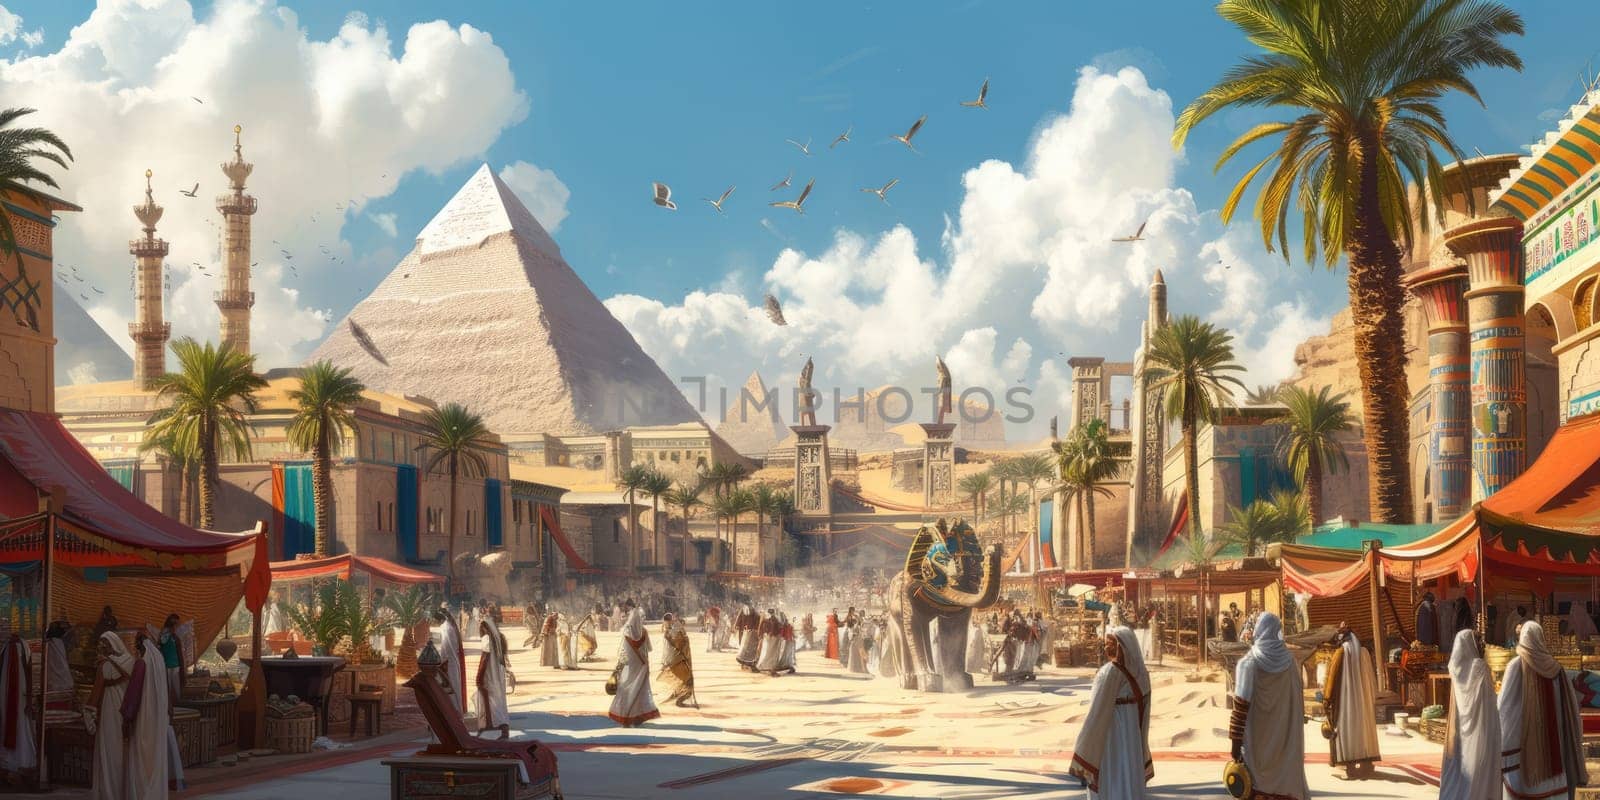 An ancient Egyptian city at the peak of its glory, with pyramids. Resplendent. by biancoblue